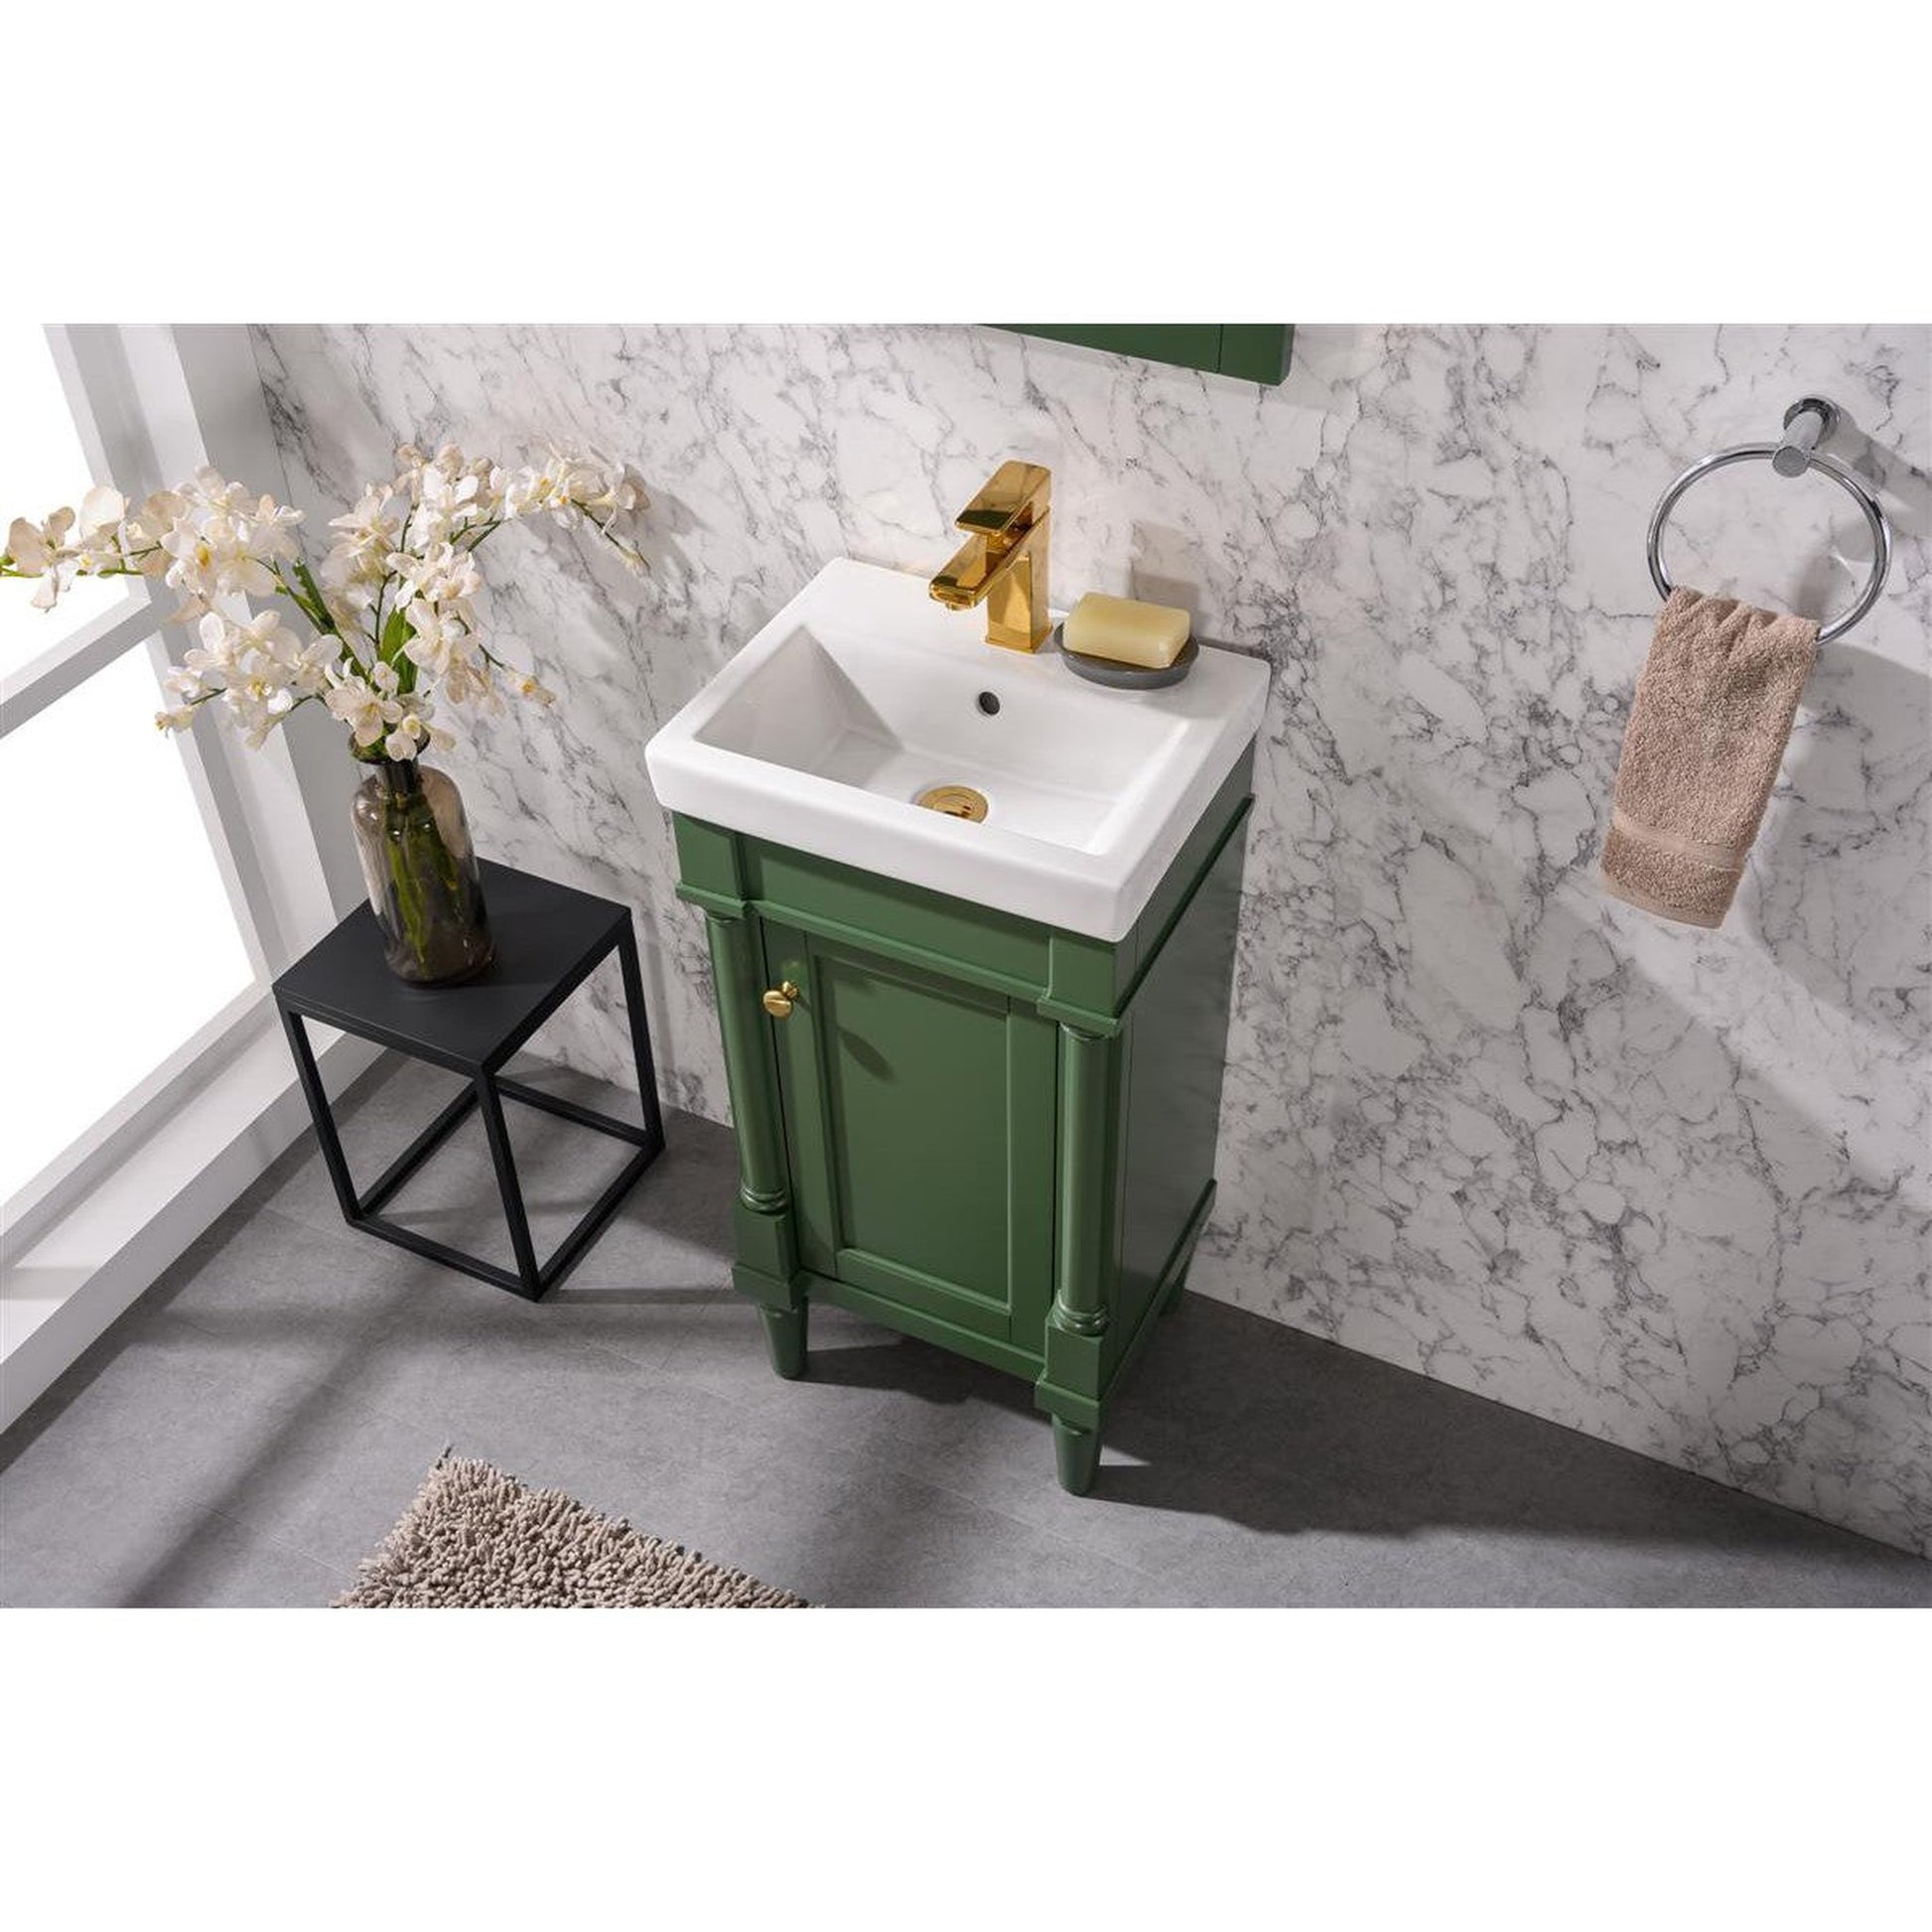 Legion Furniture WLF9218 18" Vogue Green Freestanding Vanity Cabinet With White Ceramic Top and Sink